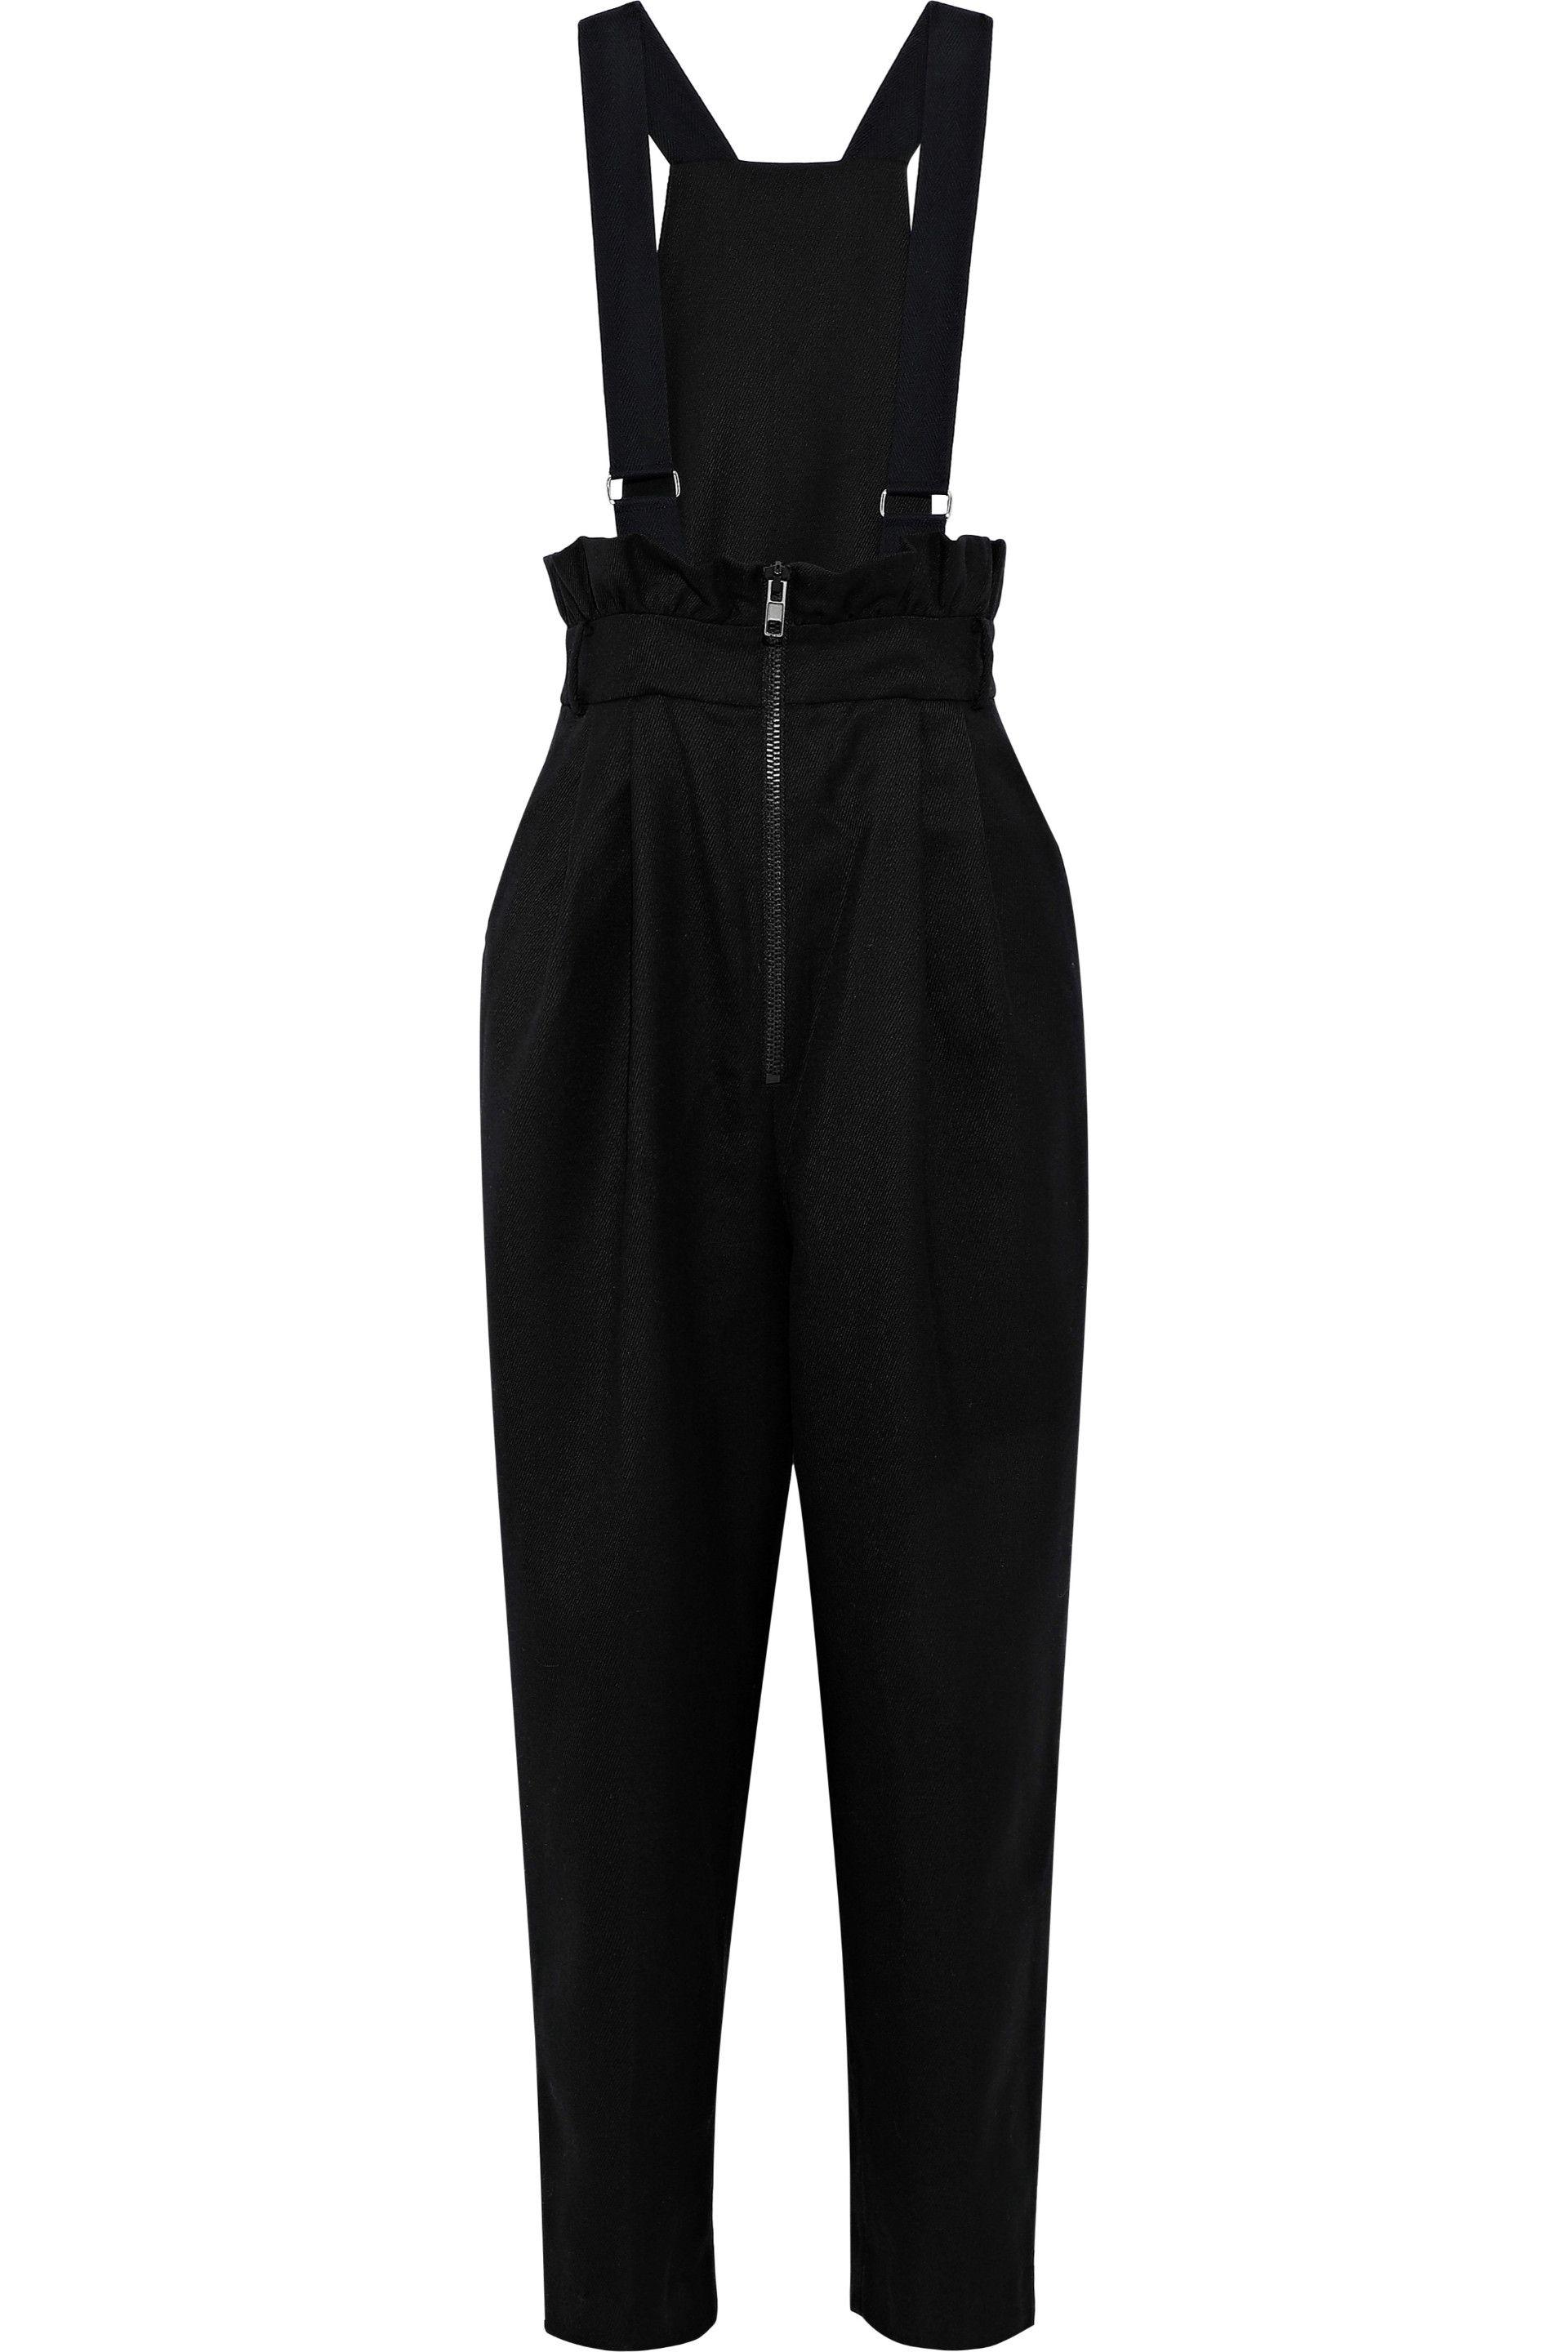 Tibi Luxe Tuxedo Paperbag Convertible Wool-twill Overalls Black - Lyst